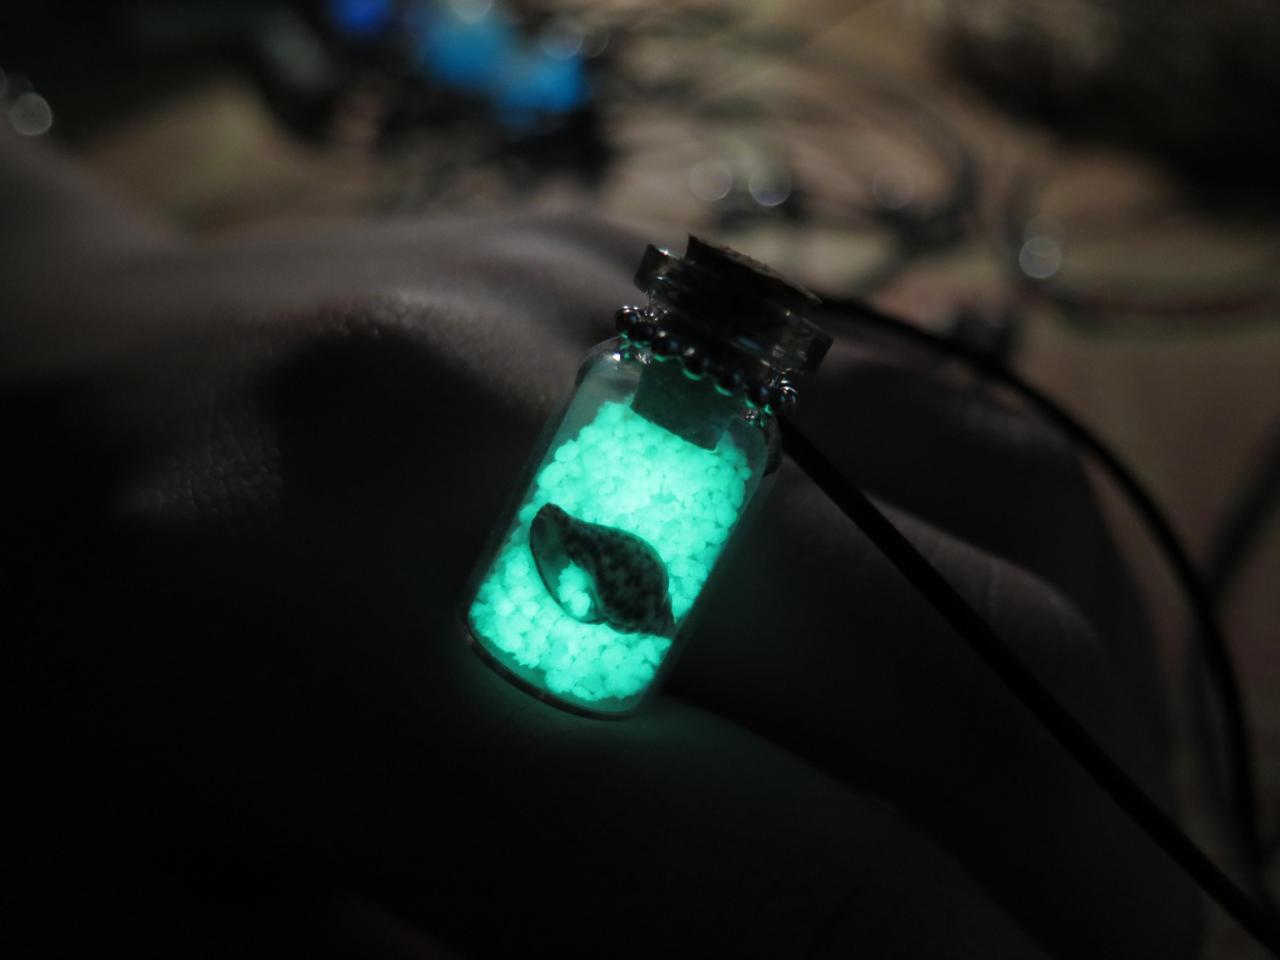 Free Shipping Green Wishing Bottle Glowing necklace, Glow Bracelet in the dark, Glowing Jewelry,Glow Pendant Necklace,Party necklace